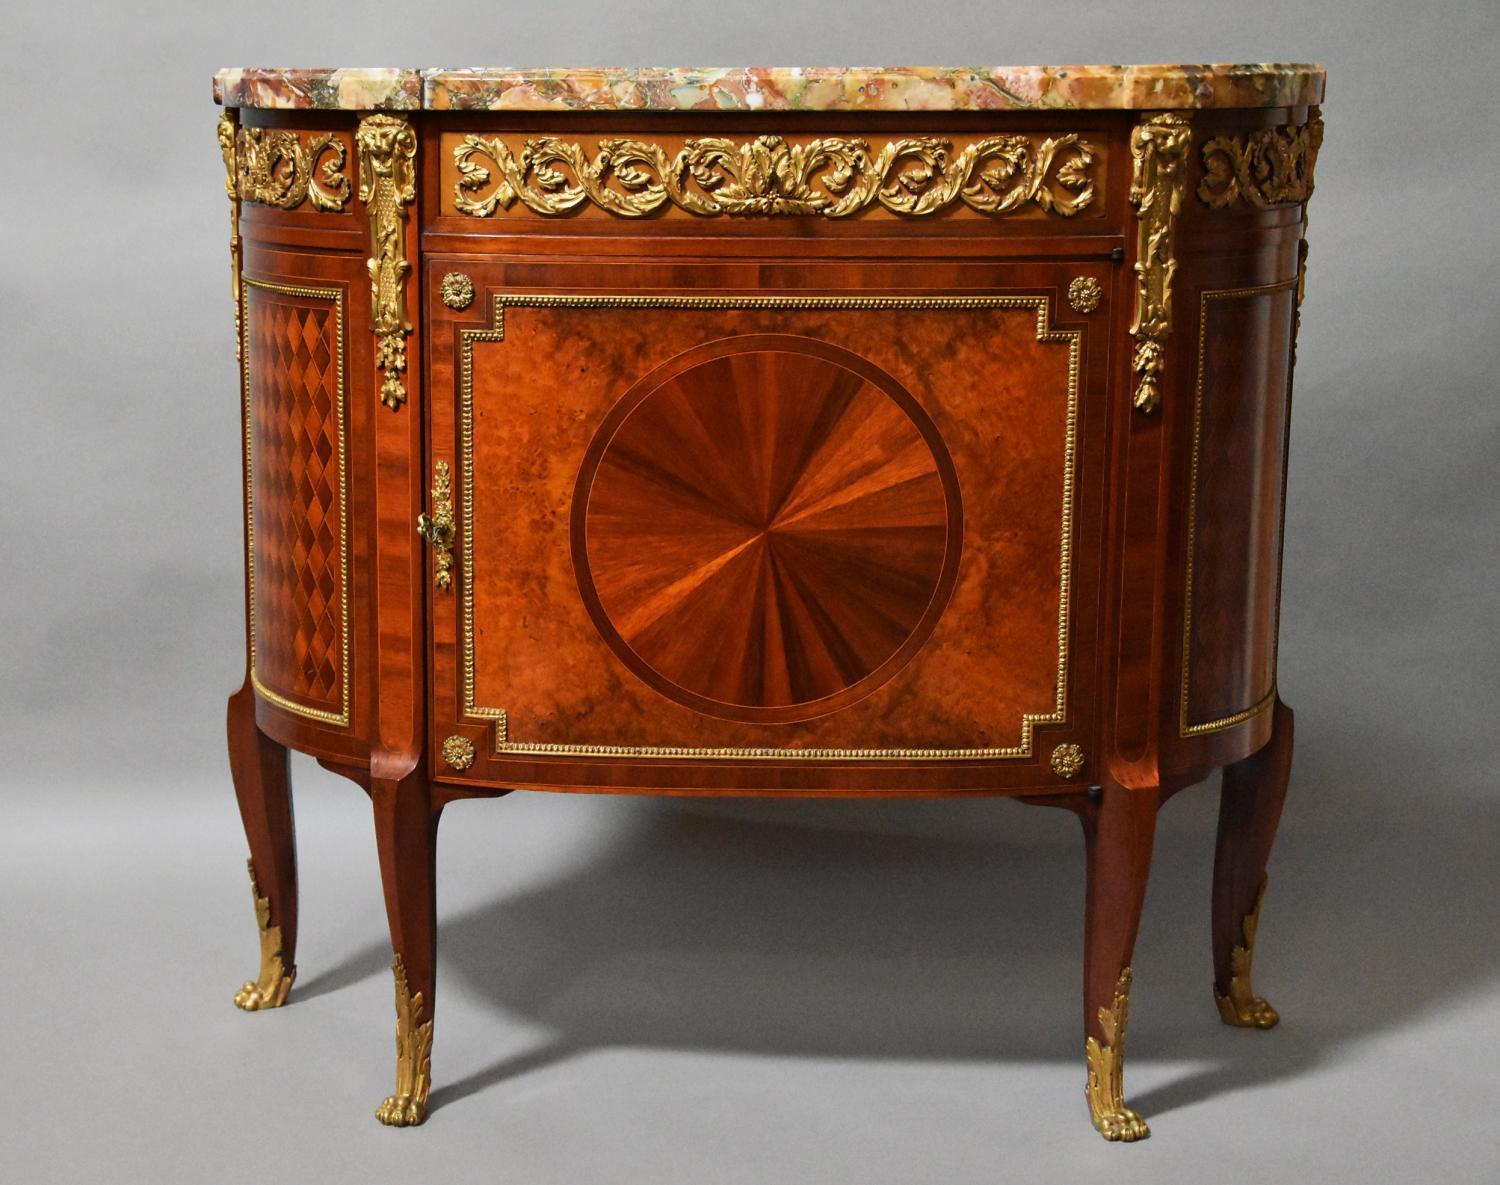 Fine quality French Kingwood commode